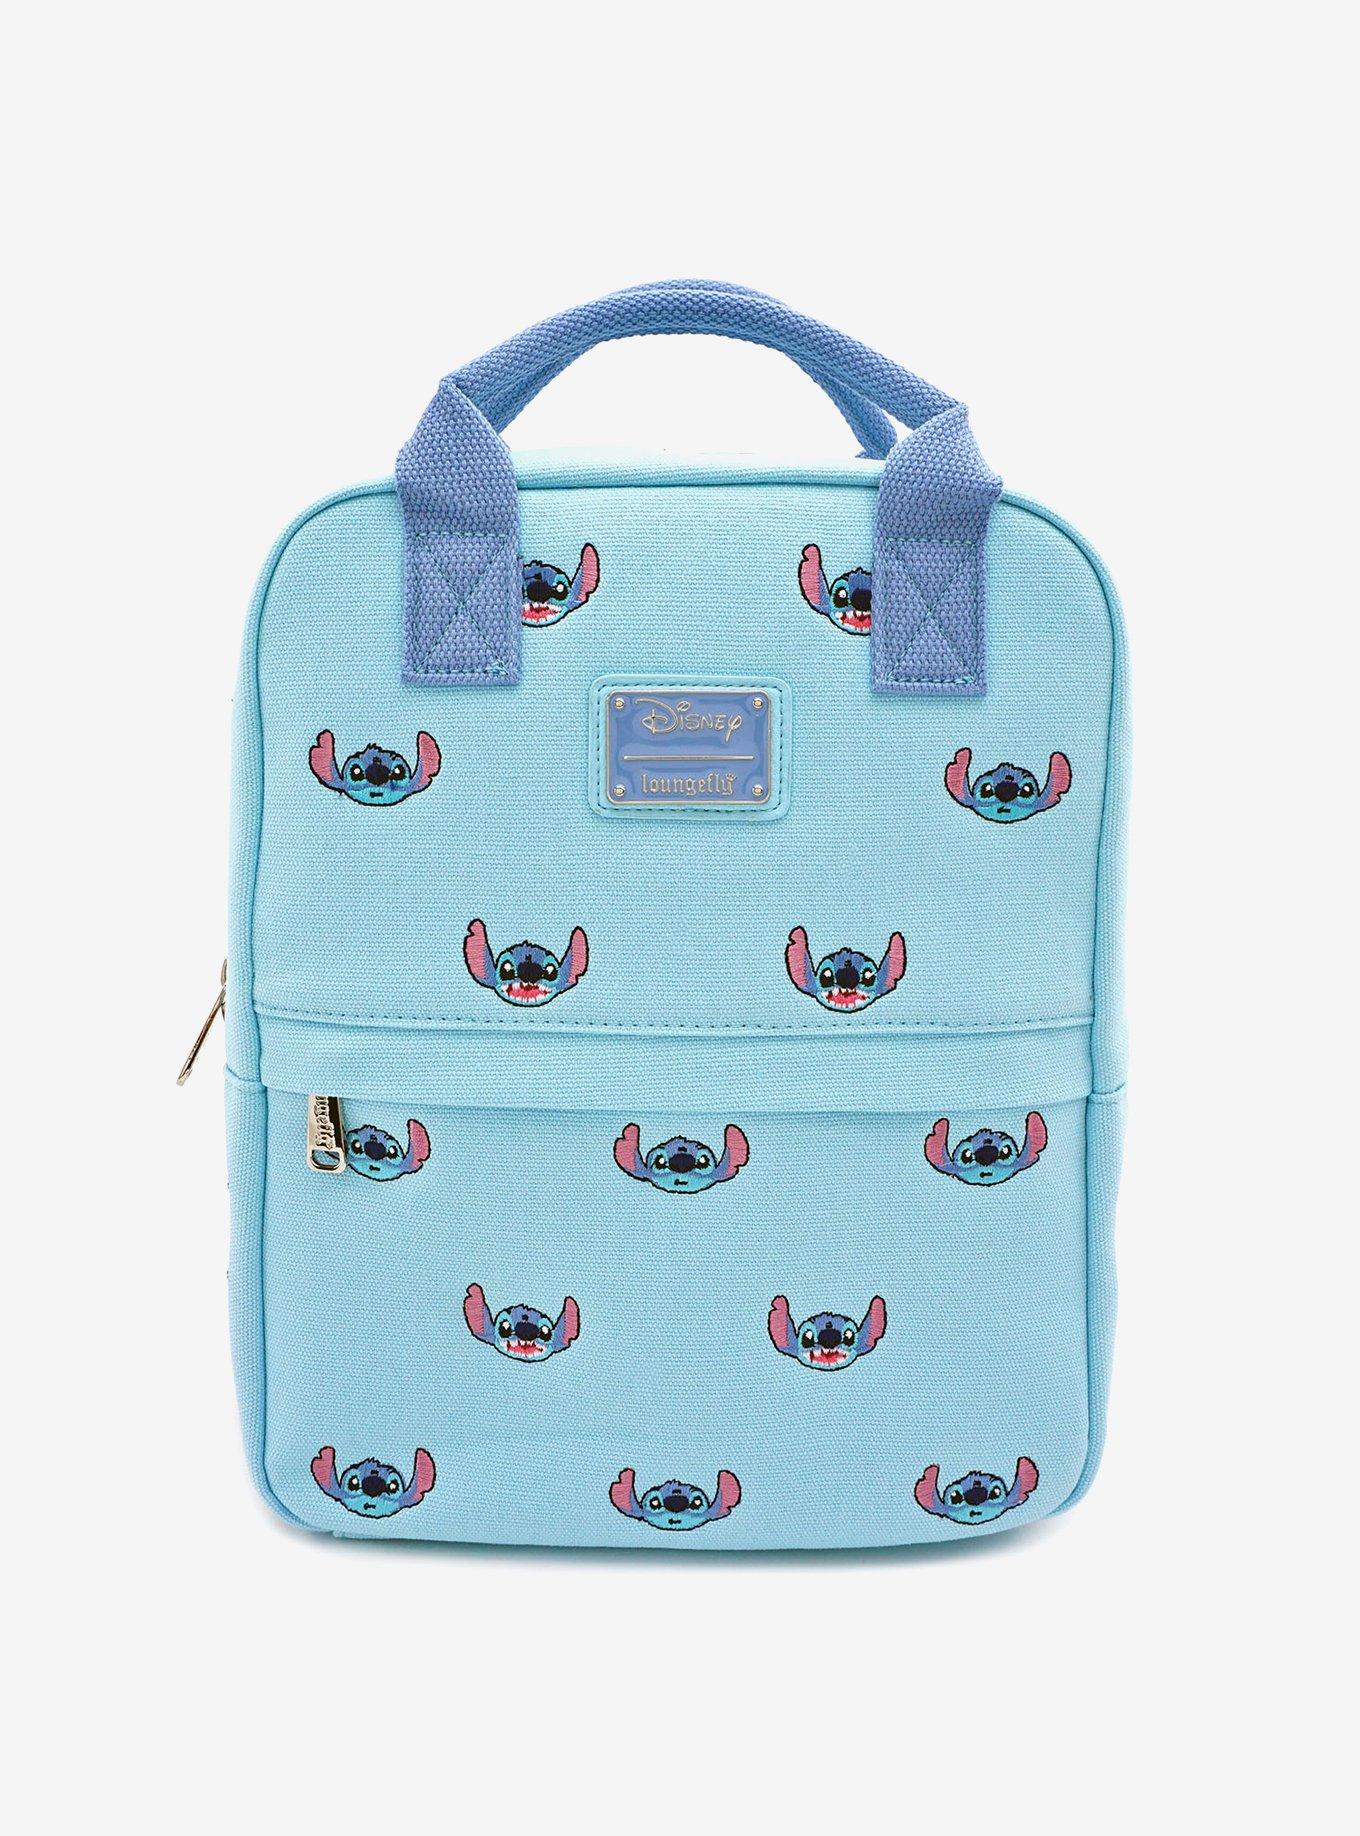 Loungefly Disney Lilo & Stitch Embroidered Mini Backpack, , hi-res